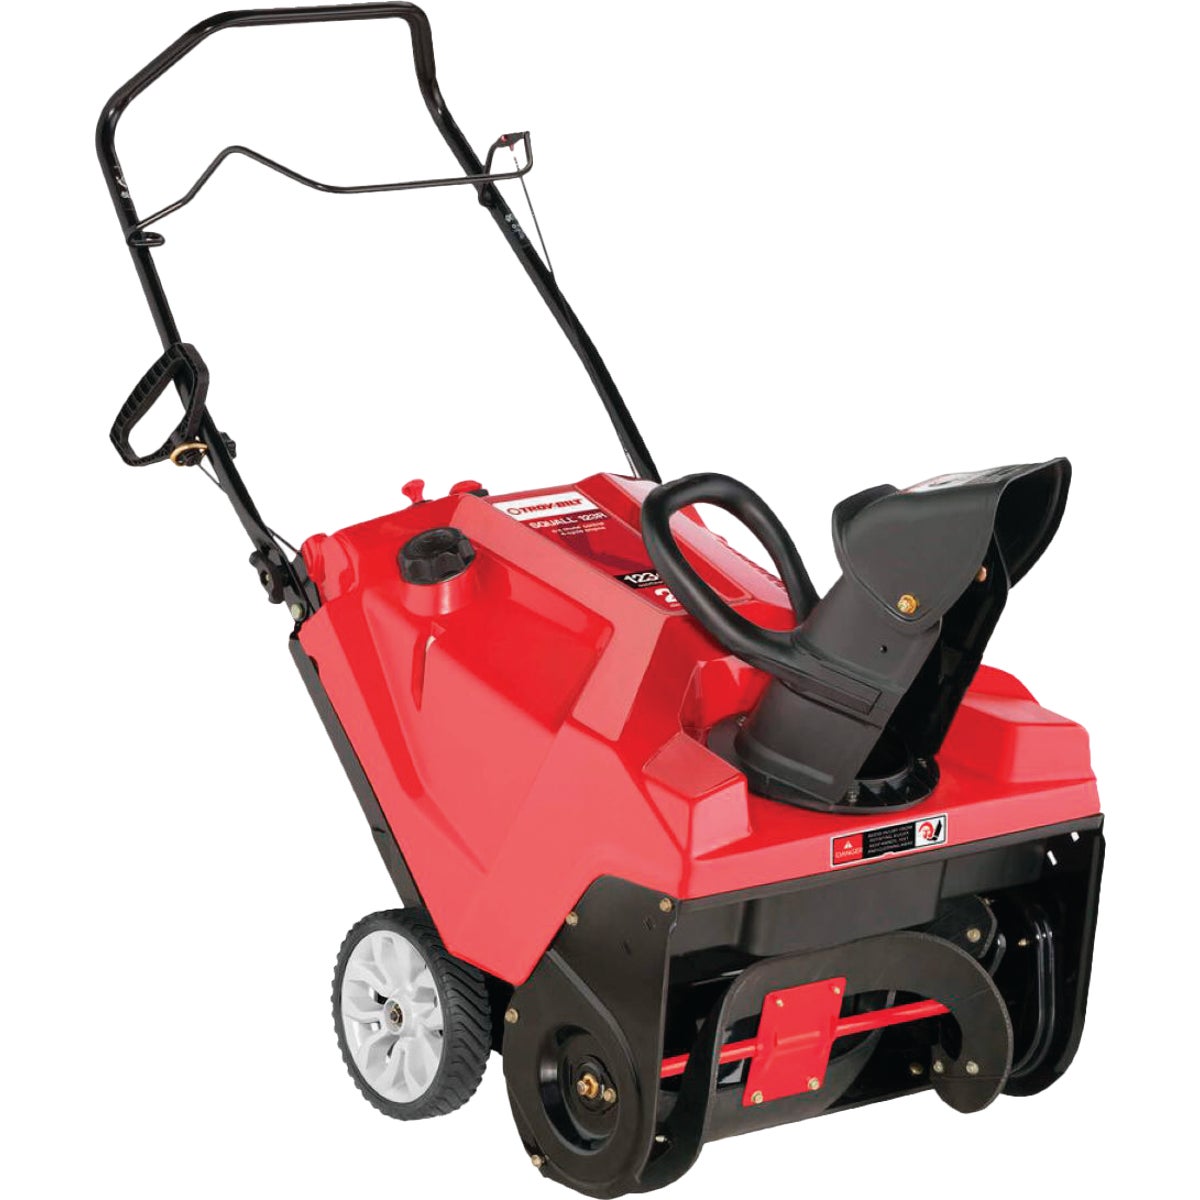 Item 707406, The Squall 123R snow blower is a light weight, single-stage snow blower 